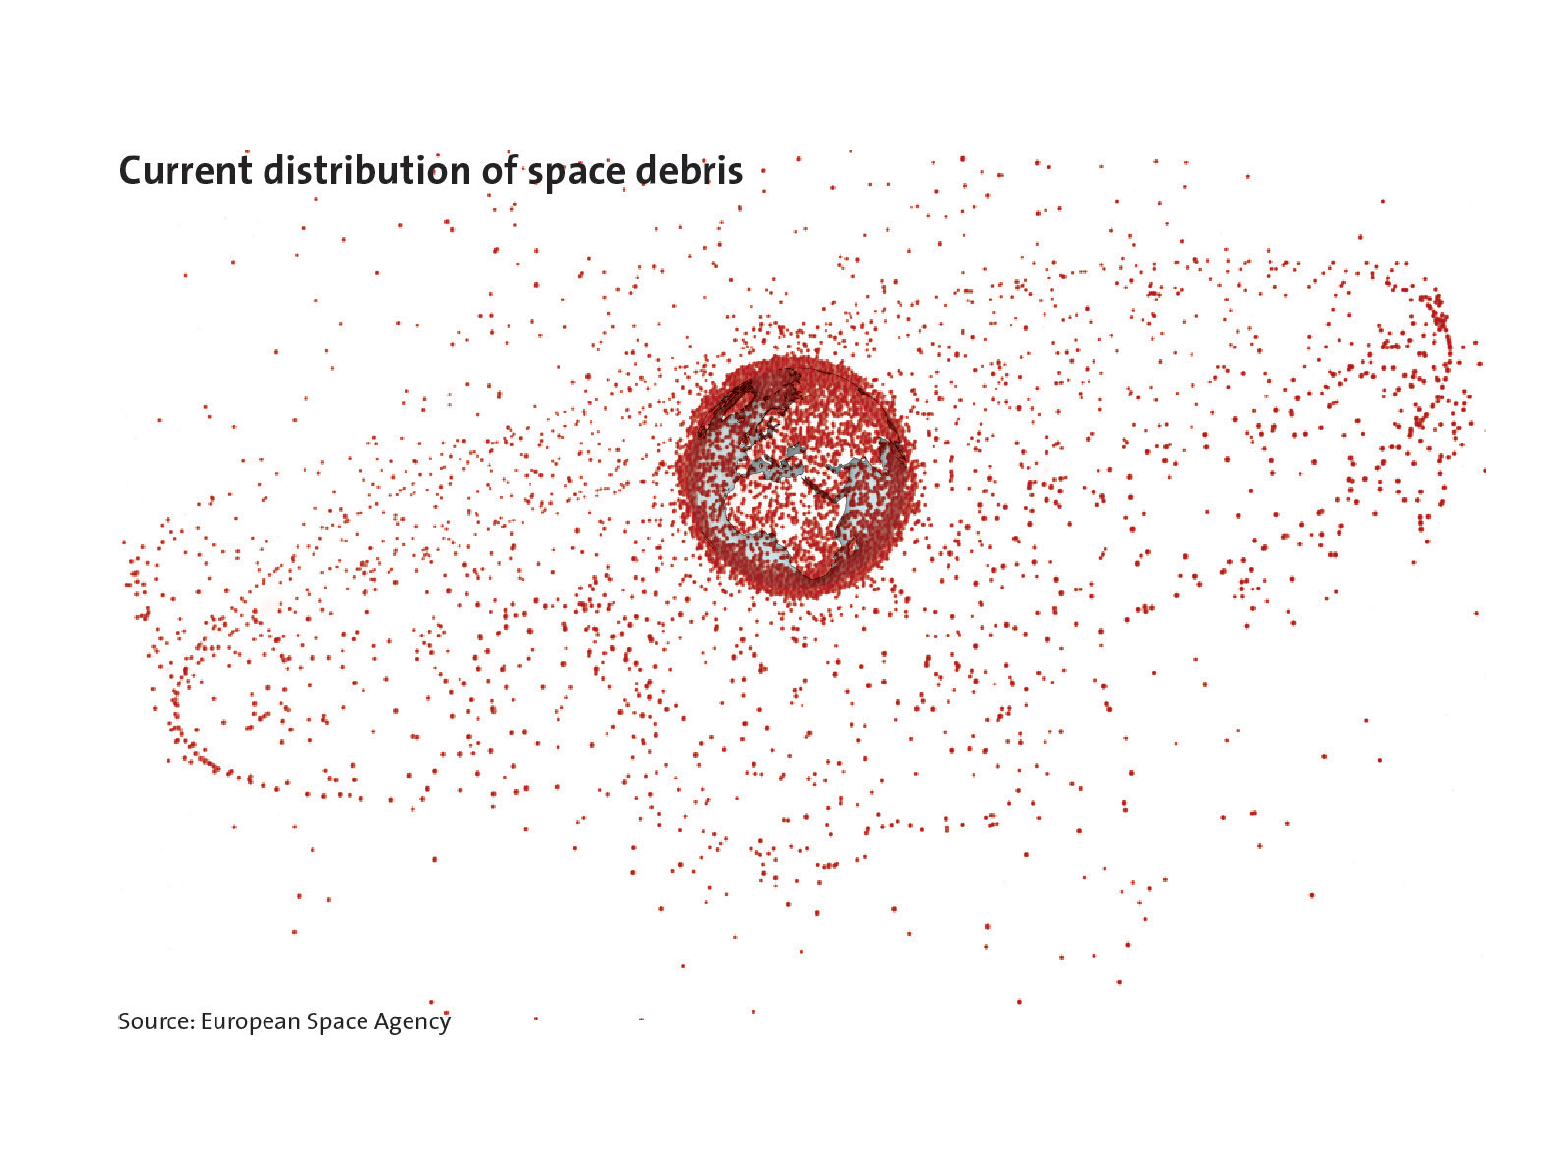 Enlarged view: Current Space Debris, courtesy of the Center for Security Studies